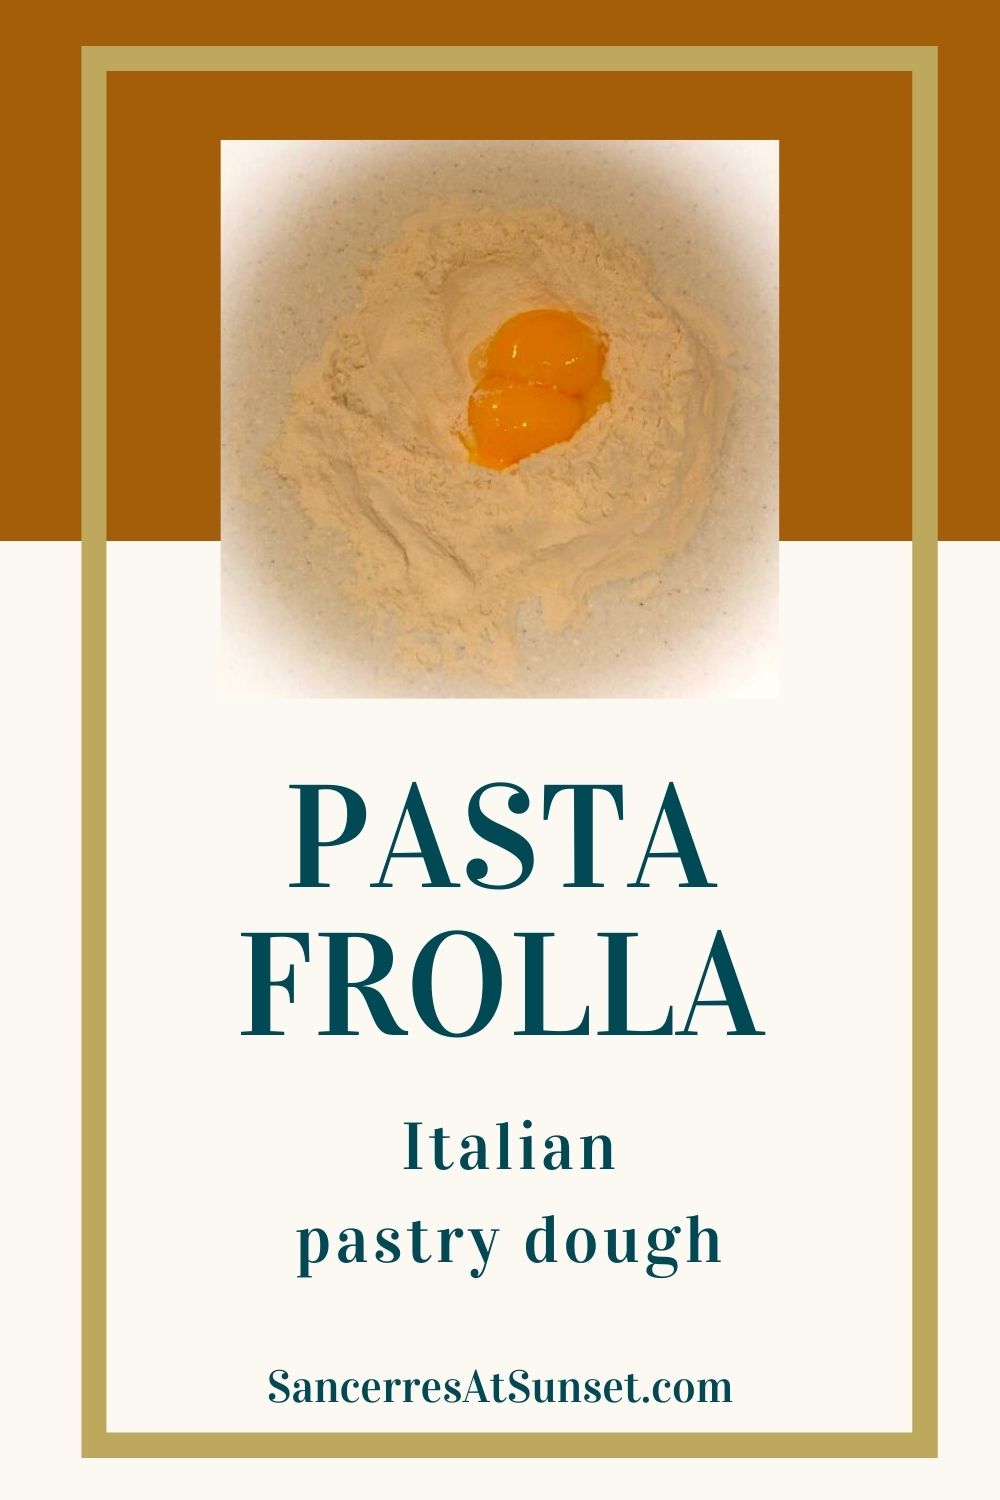 How to Make Pasta Frolla, Italian Pastry Dough